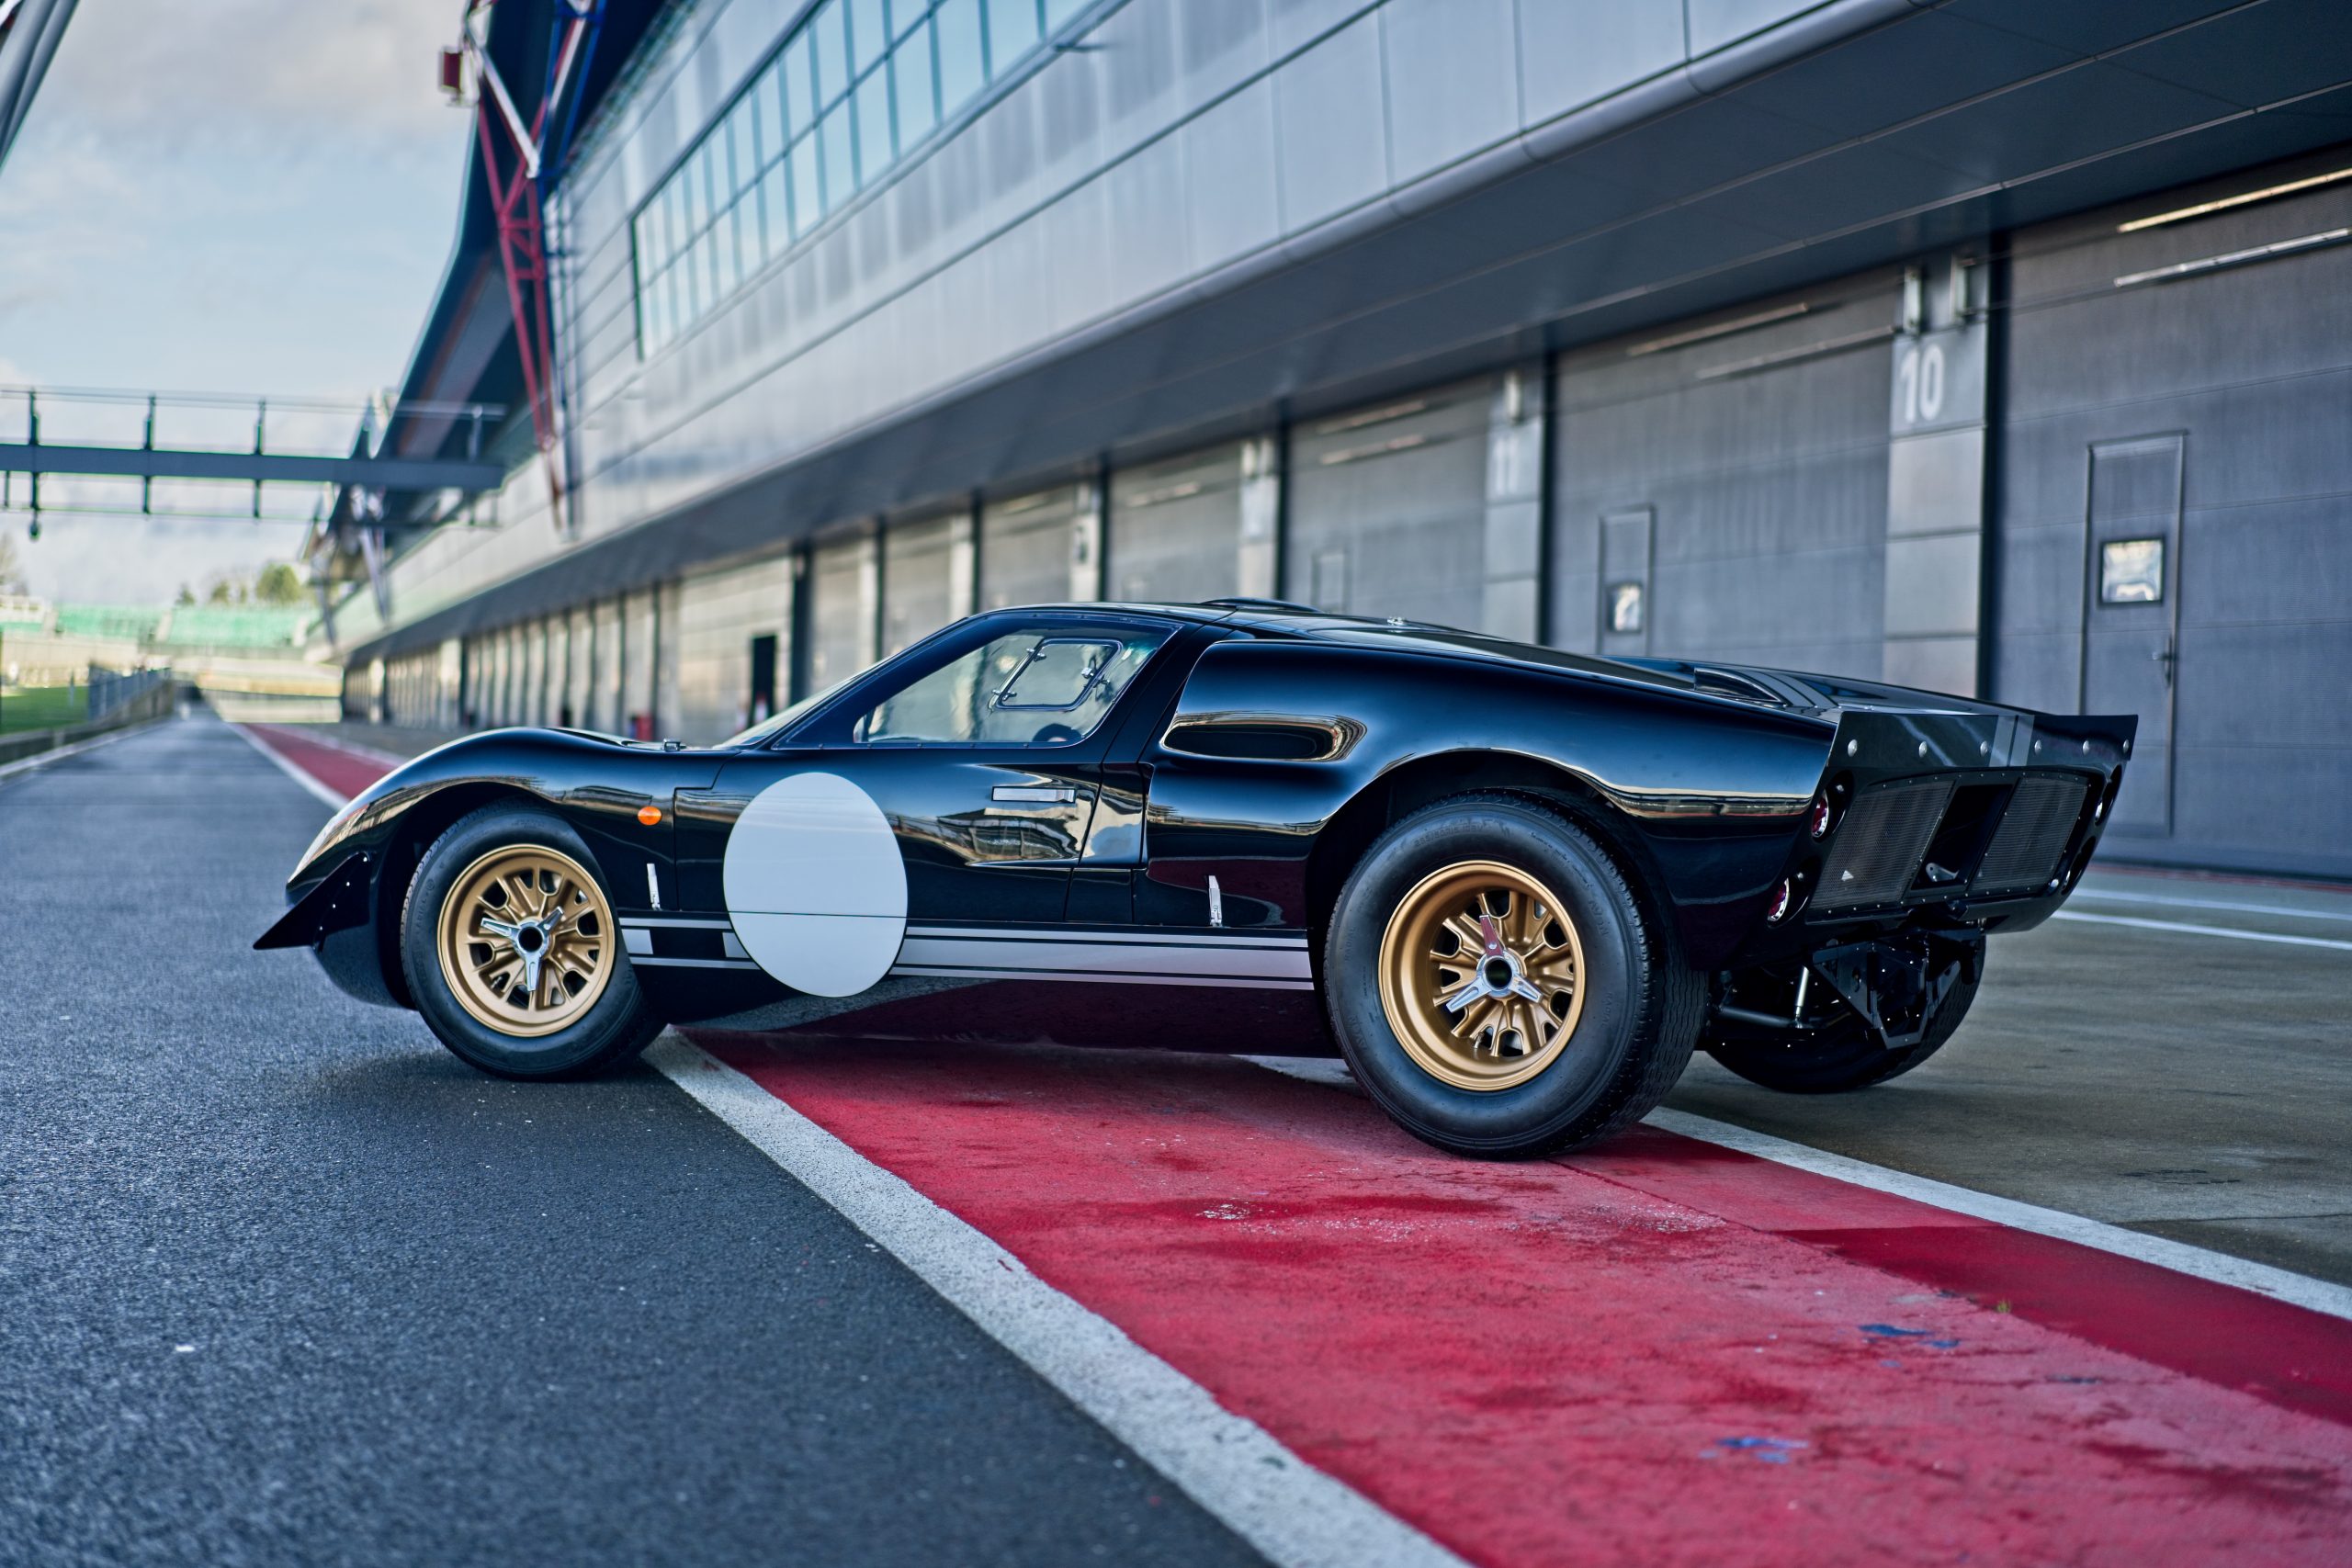 GT40 Le Mans legend goes electric with 800bhp